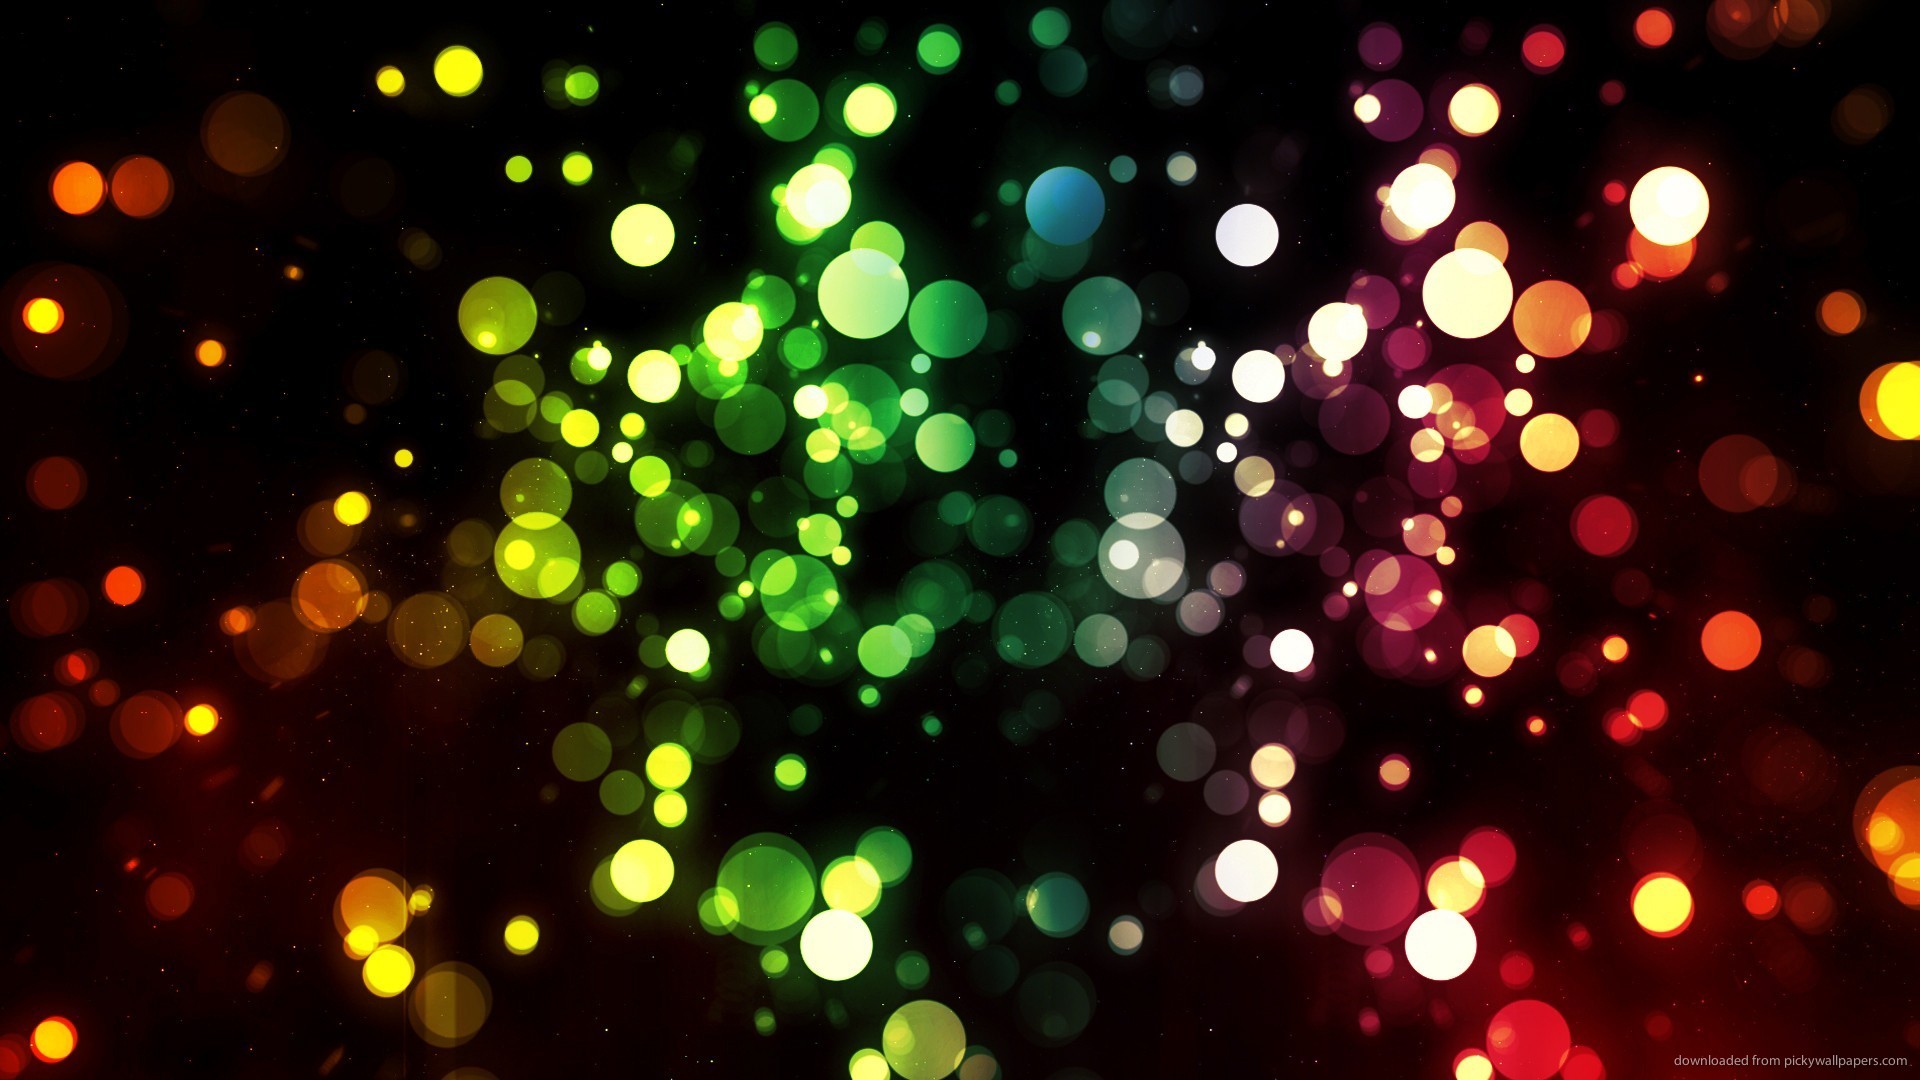 sparkly background twitter wallpaper abstract 1920x1080